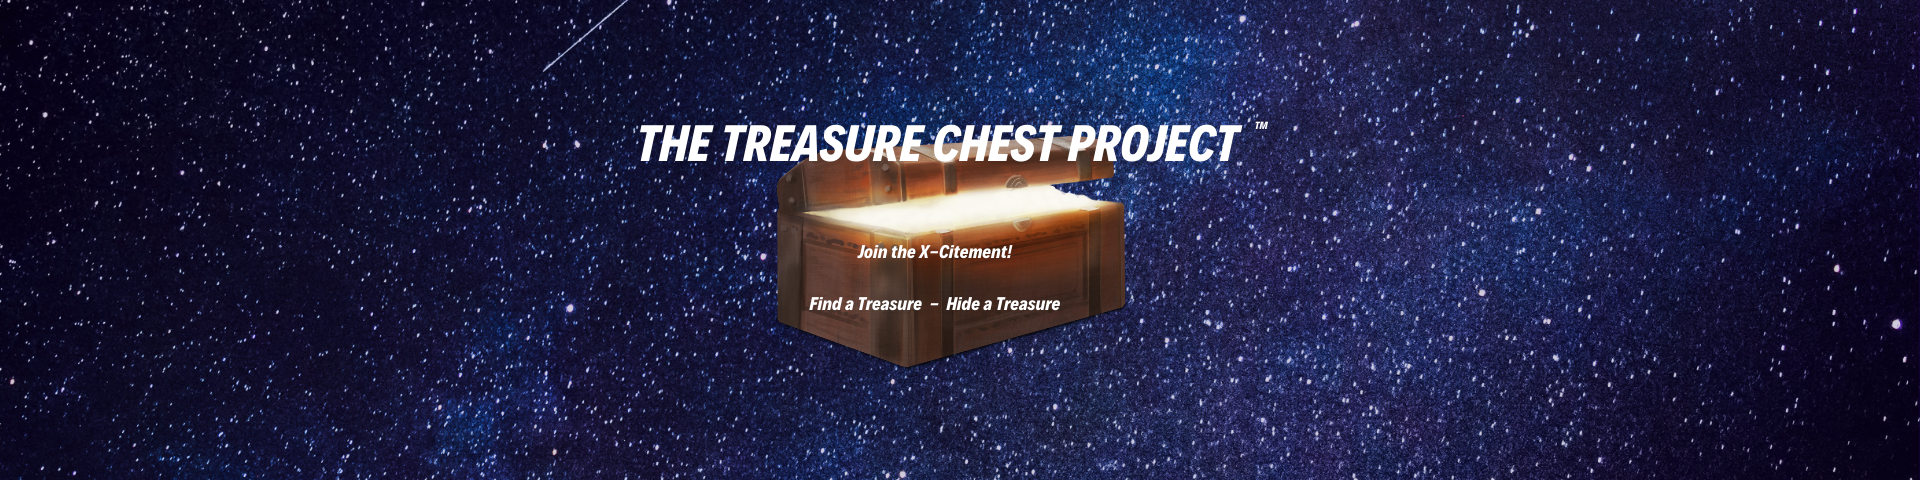 FFGM Treasure Hunt Puzzle #5 Page (While MW Thinks It Needs to Quarantine)